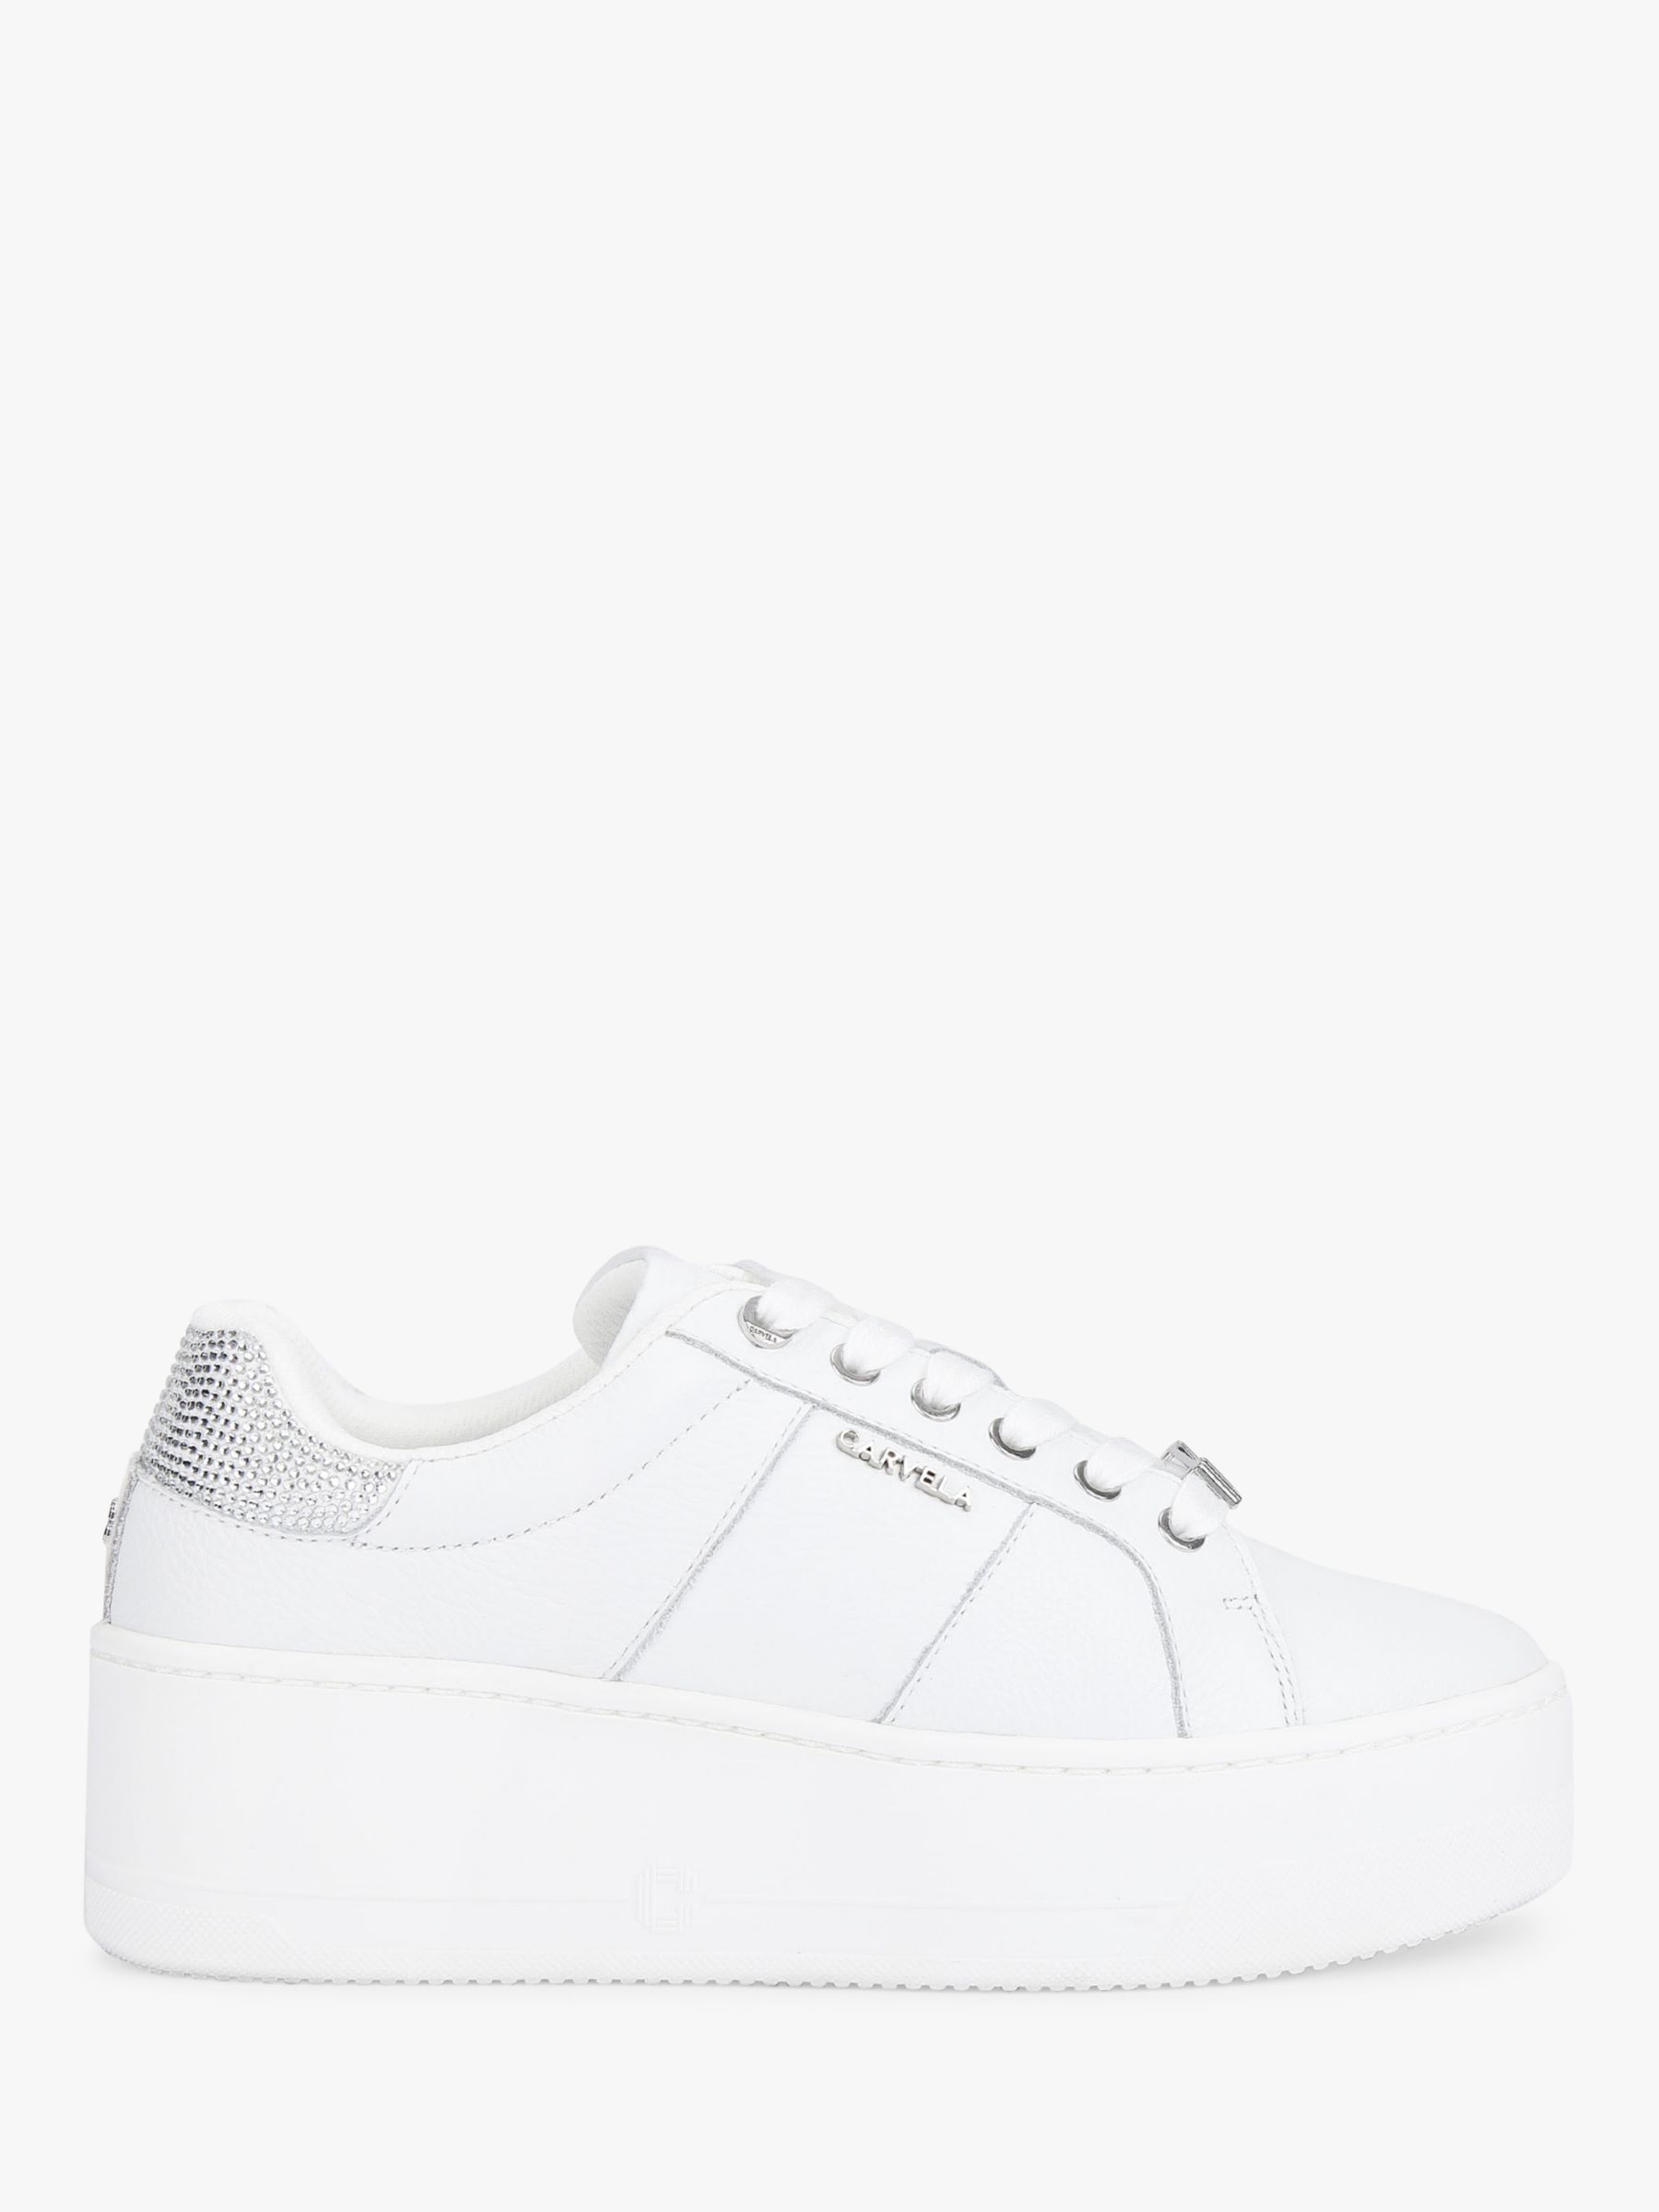 Carvela Connected Flatform Chunky Trainers, White/Silver at John Lewis ...